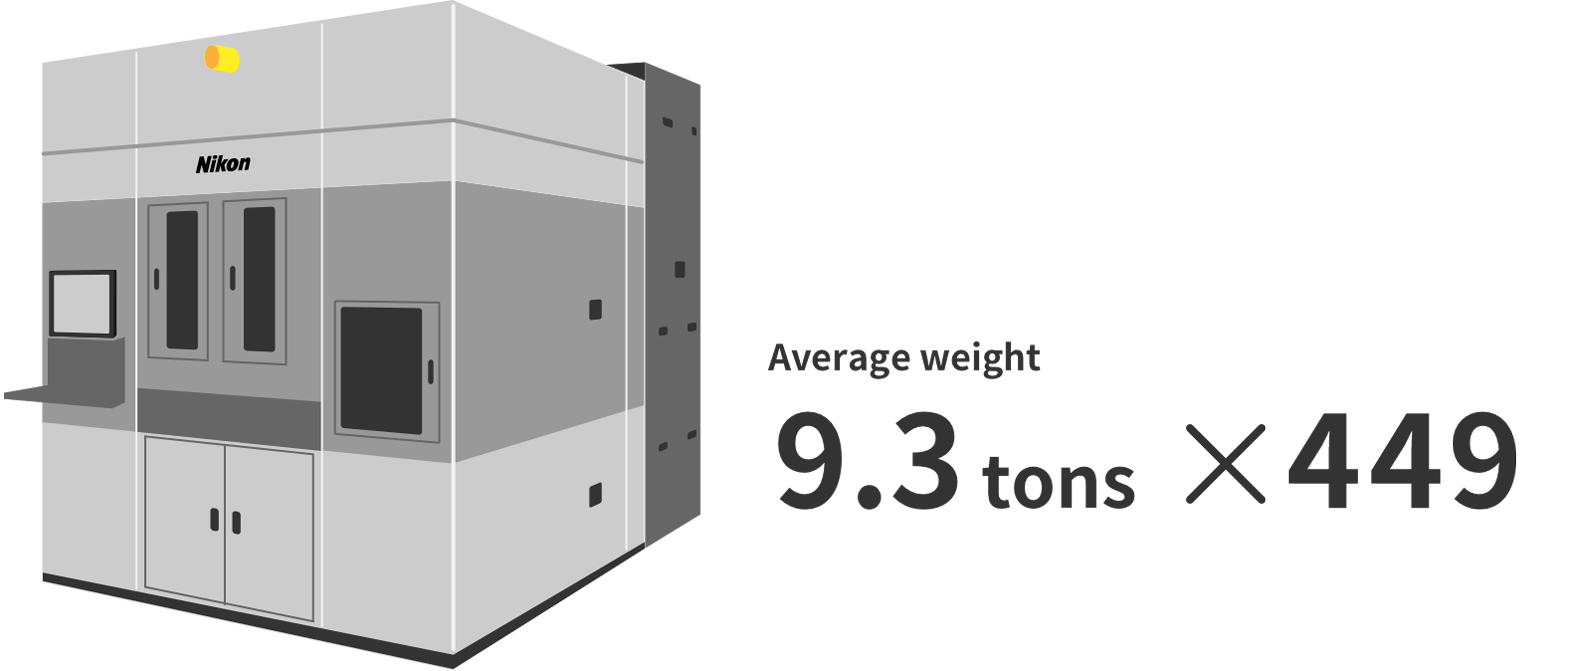 Average Weight 9.3tons * 402